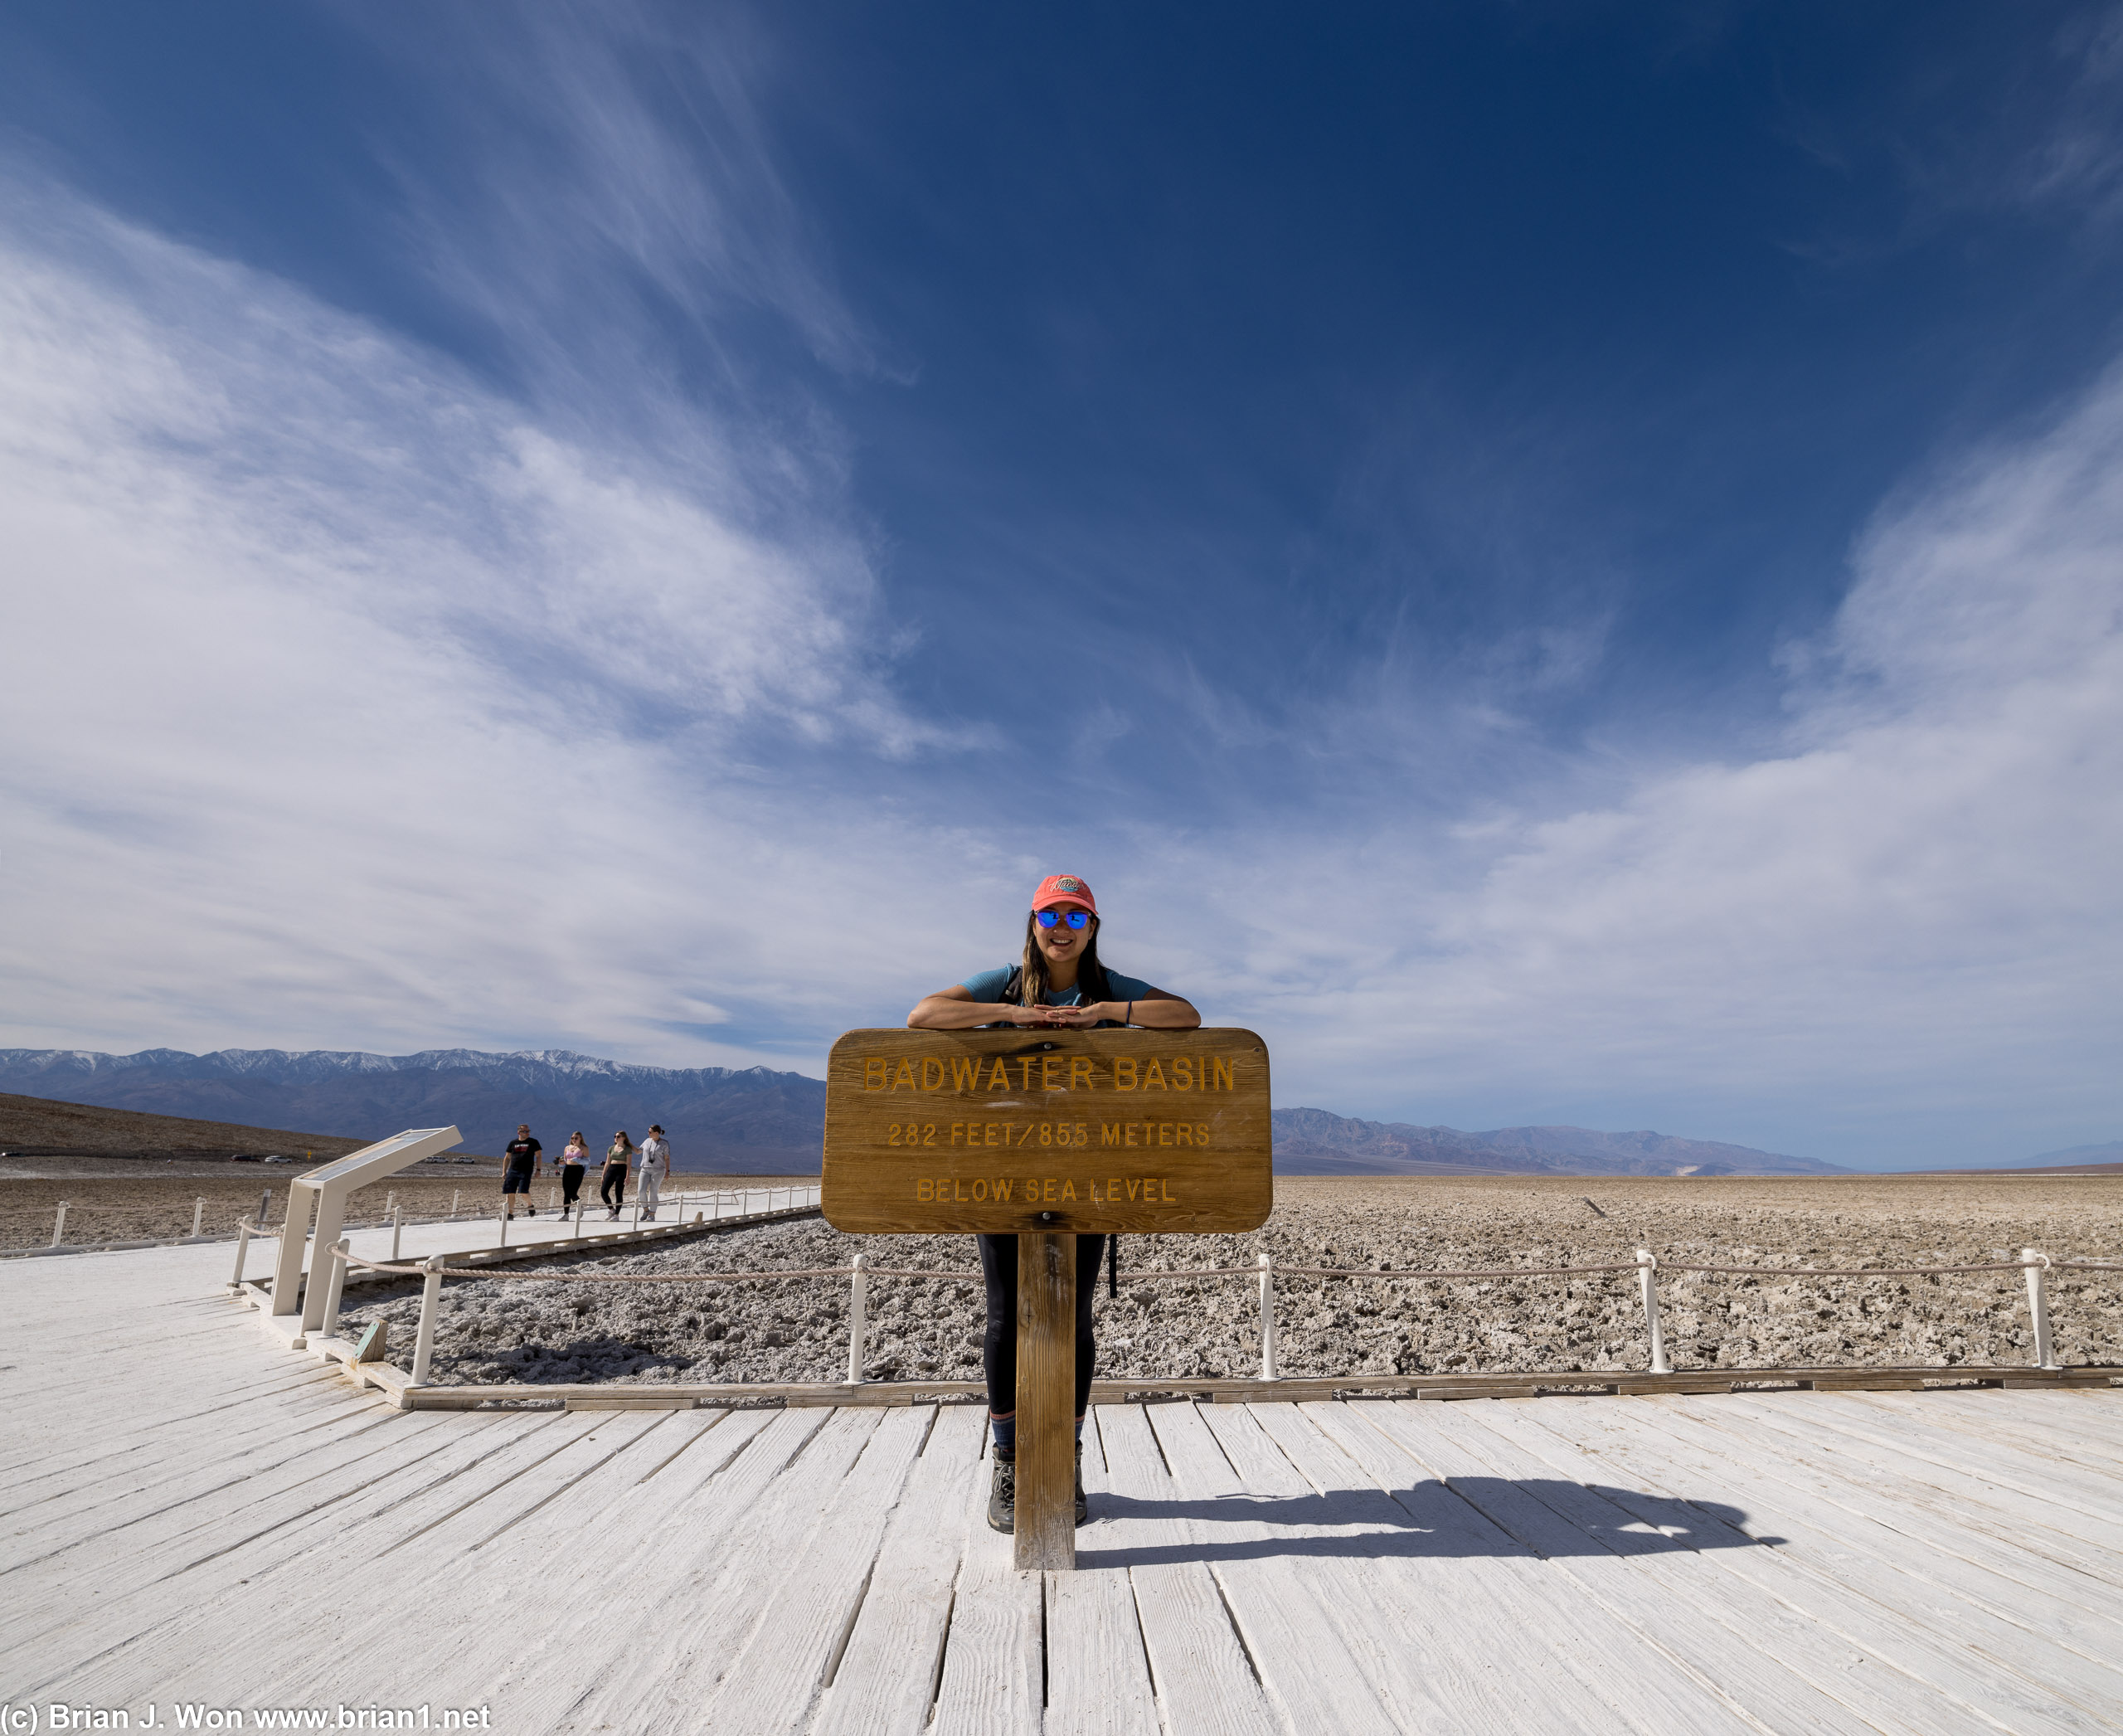 Badwater Basin, lowest point in the continential United States (282 feet/855 meters below sea level).